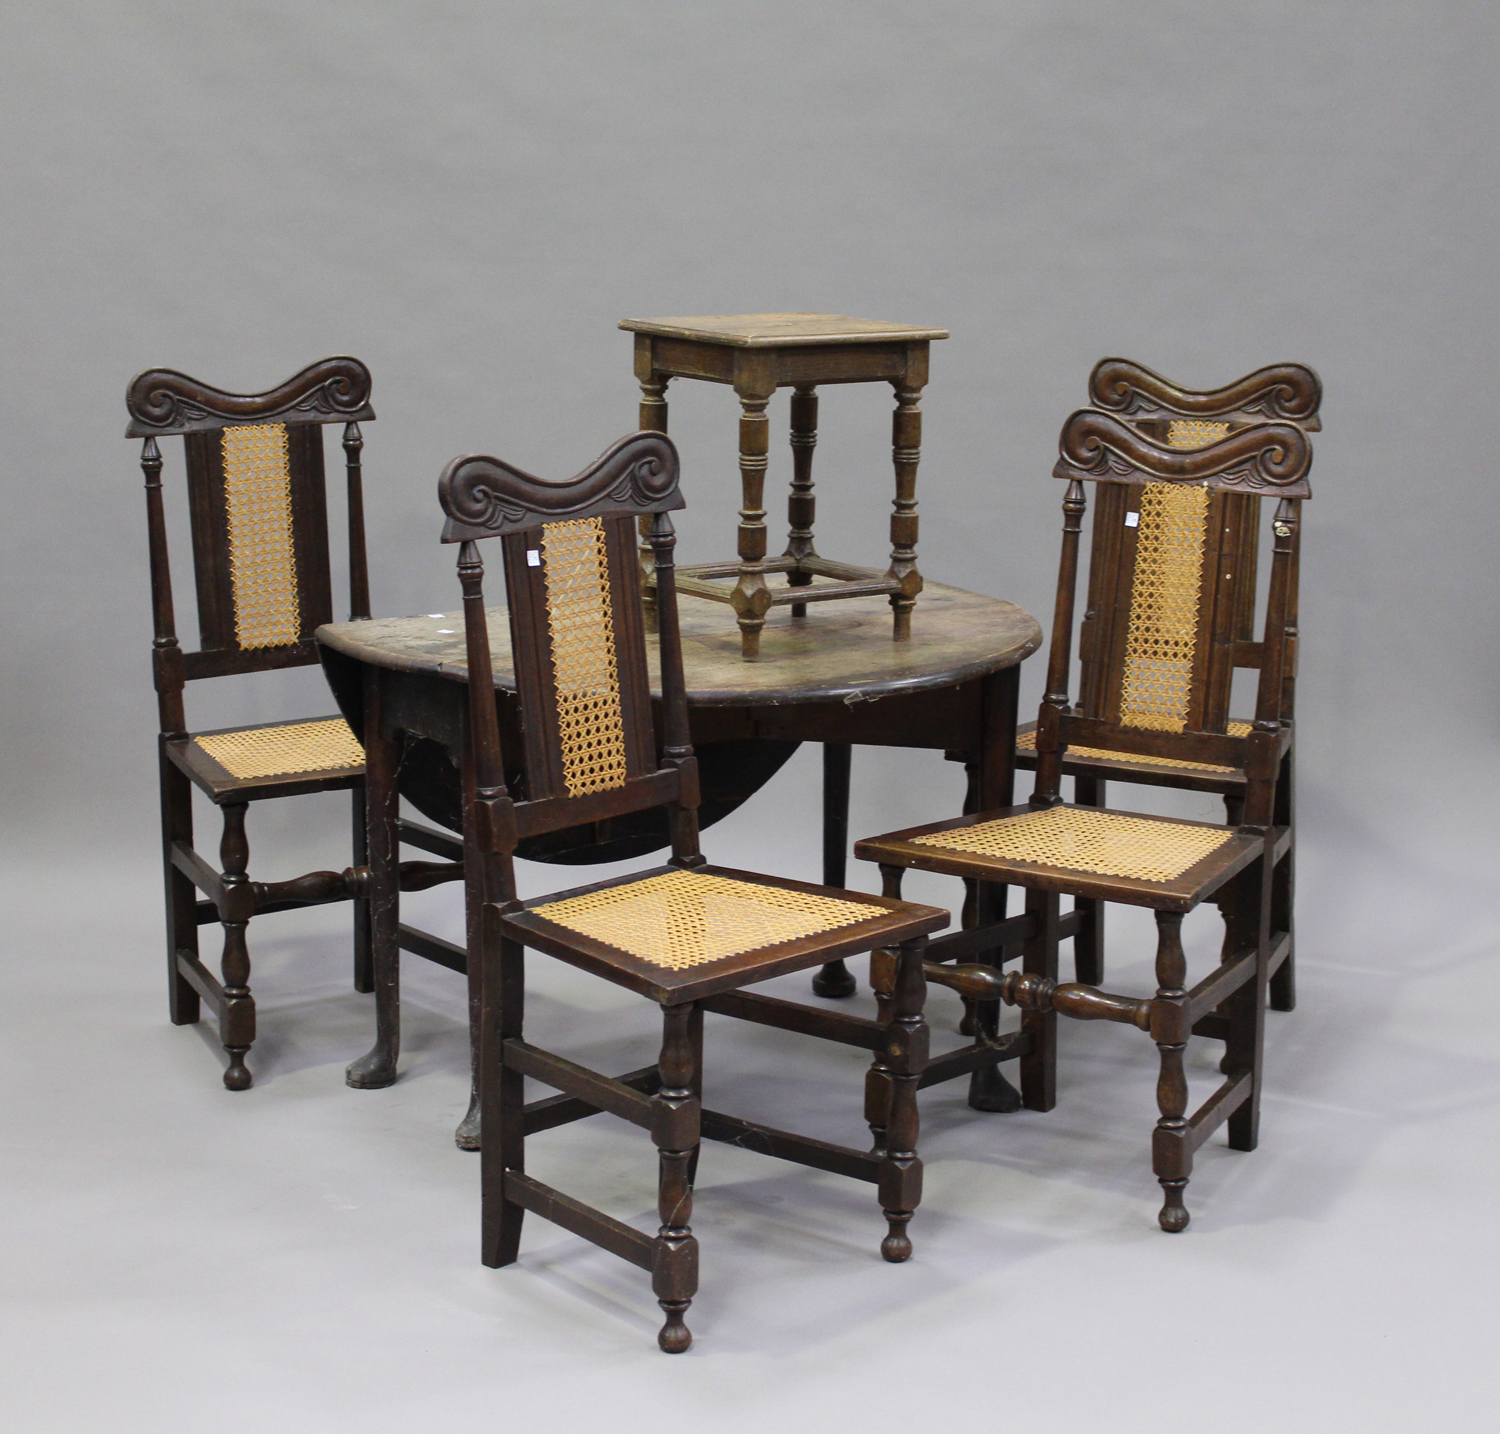 A set of four 19th century Carolean Revival oak dining chairs with carved decoration, the cane seats